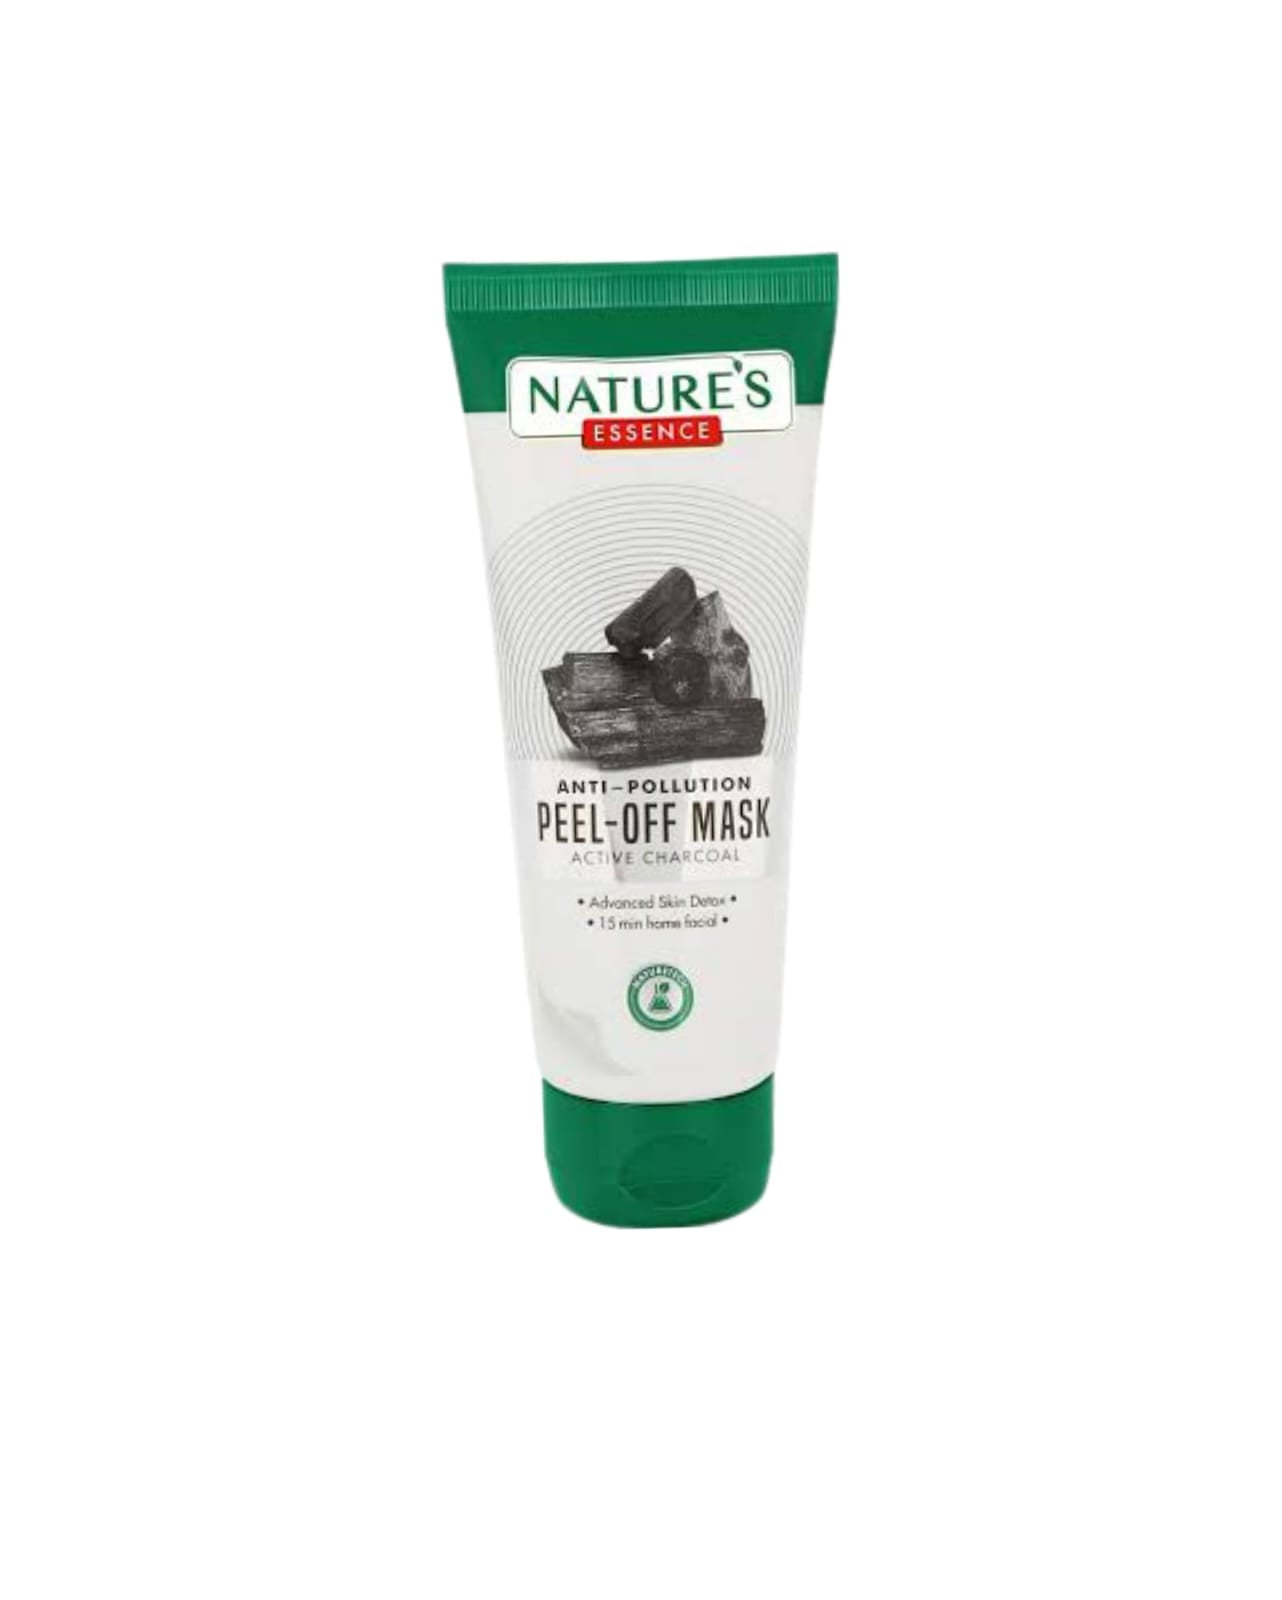 Natures Essence Anti-Pollution Peel-Off Mask Active Charcoal